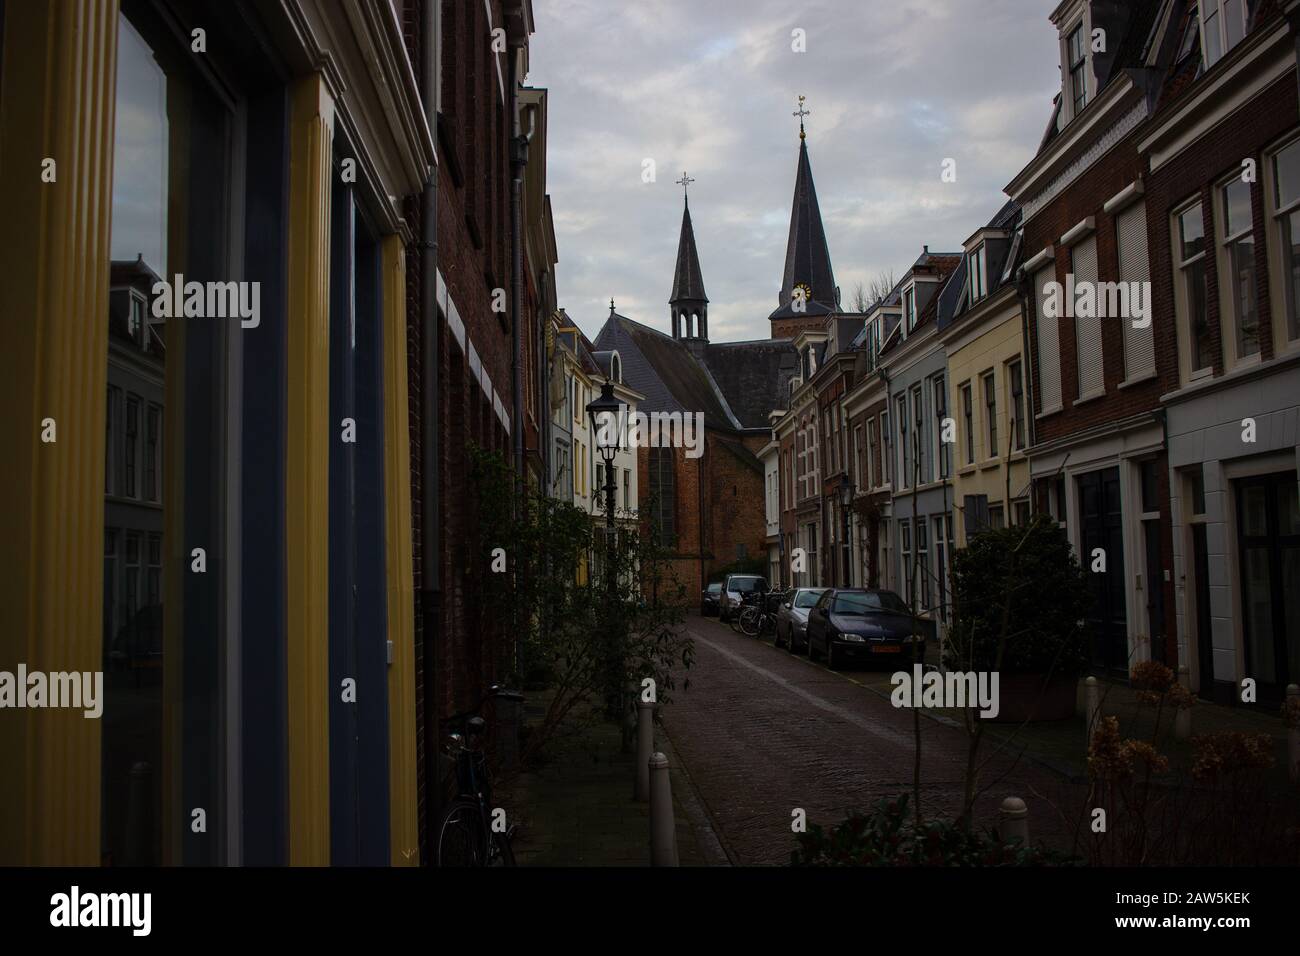 UTRECHT, NETHERLANDS - 26/1/20 - Dutch street with church steeples in the background Stock Photo